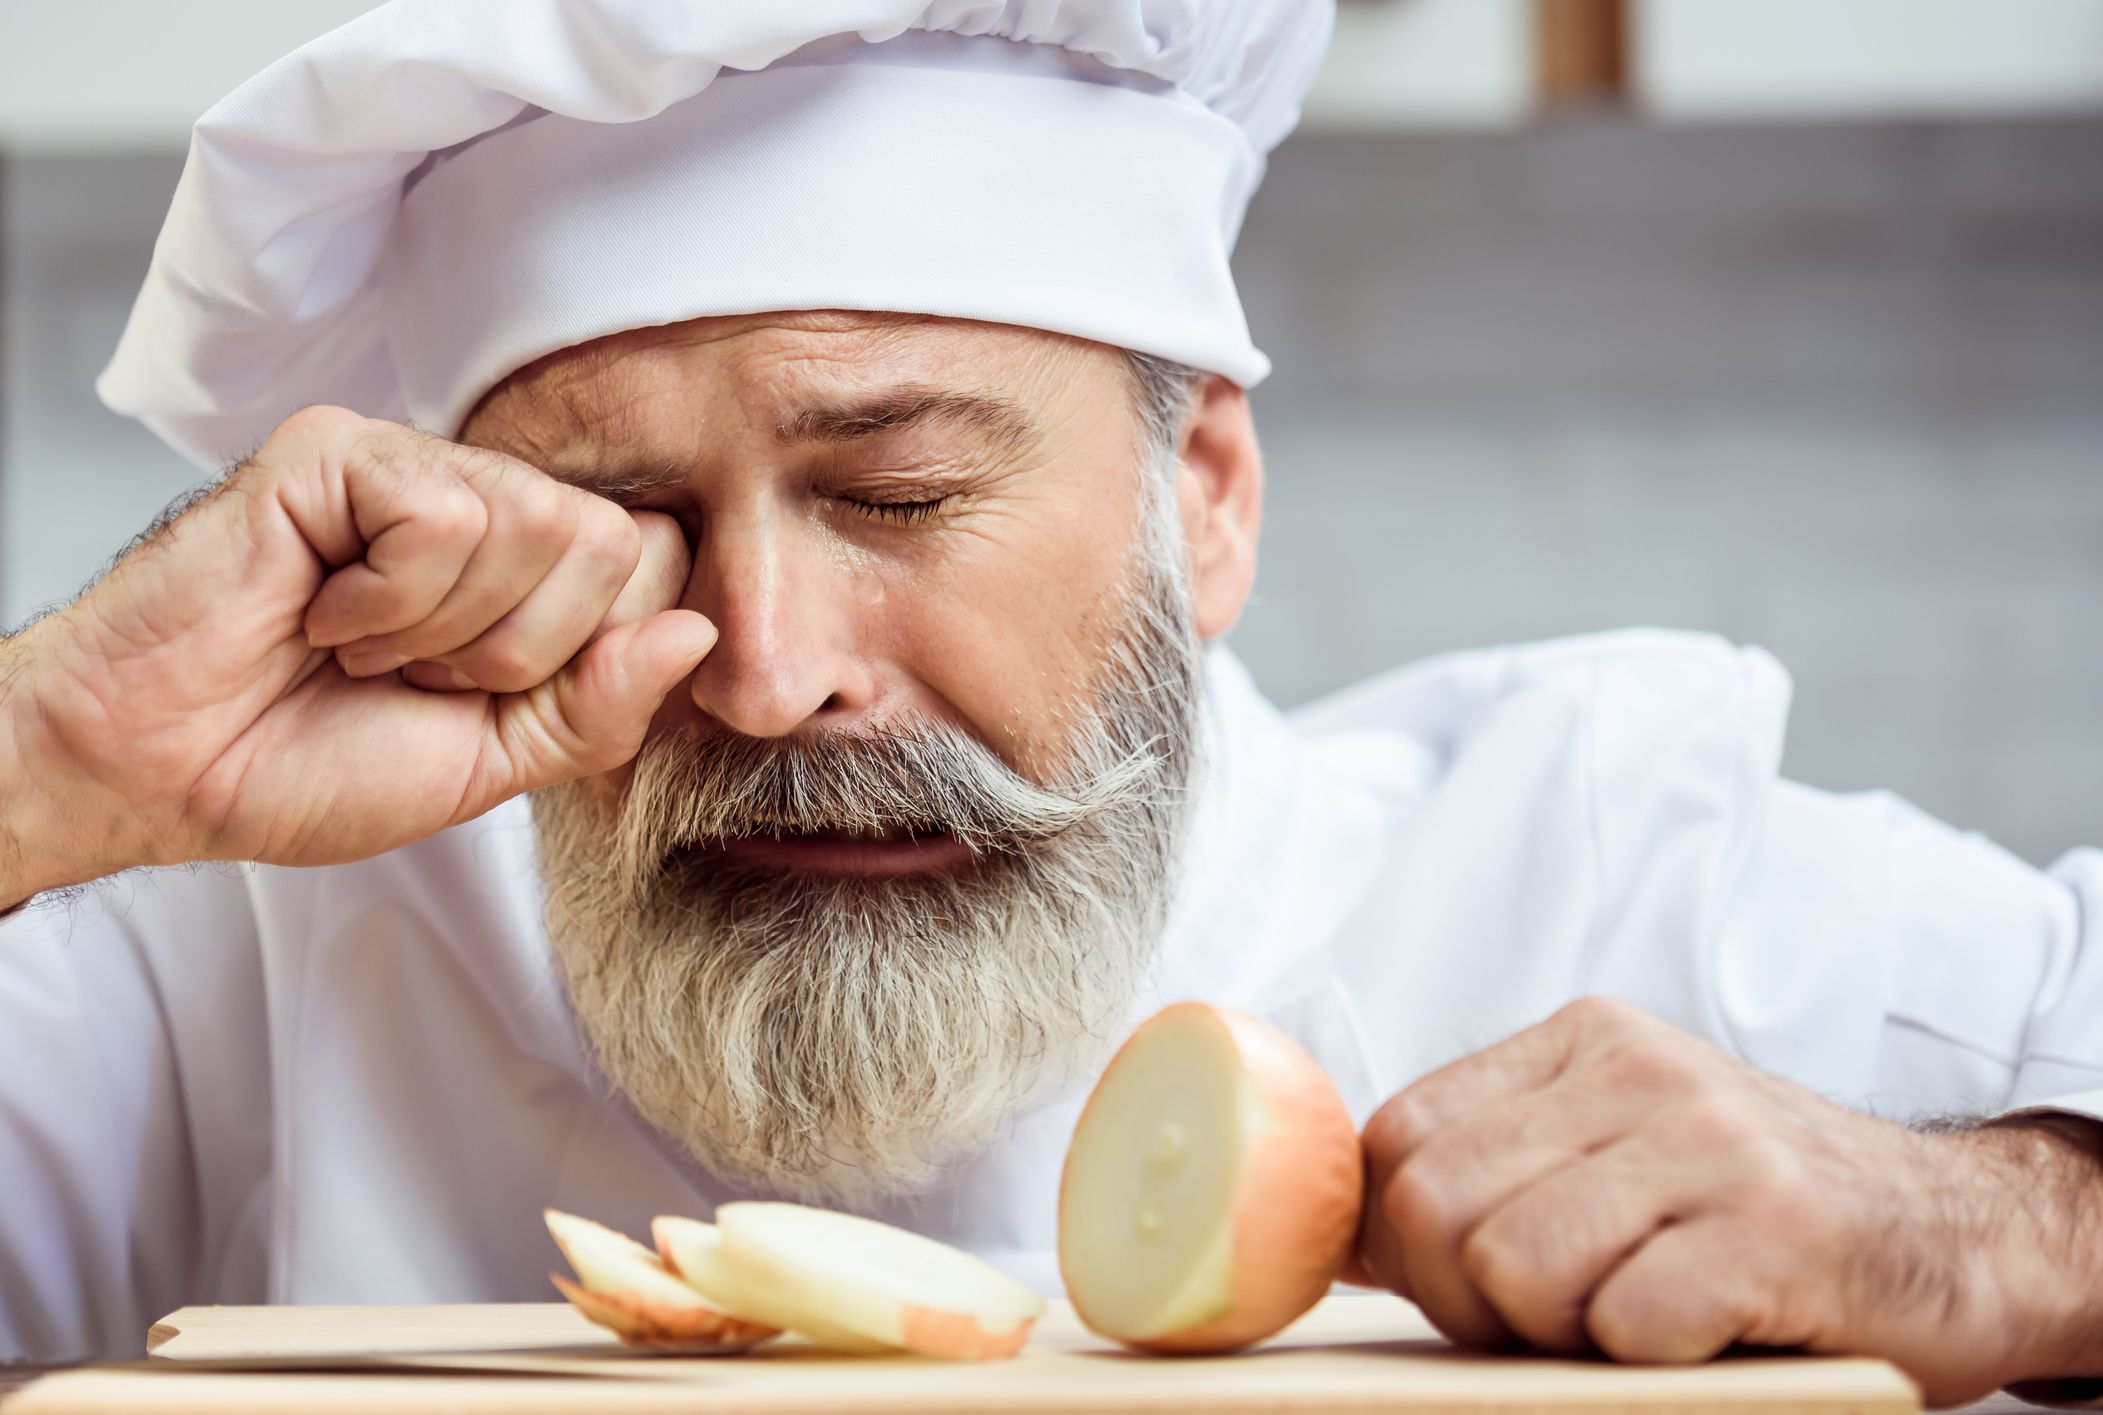 man in chef outfit standing over cut onions wiping tears away